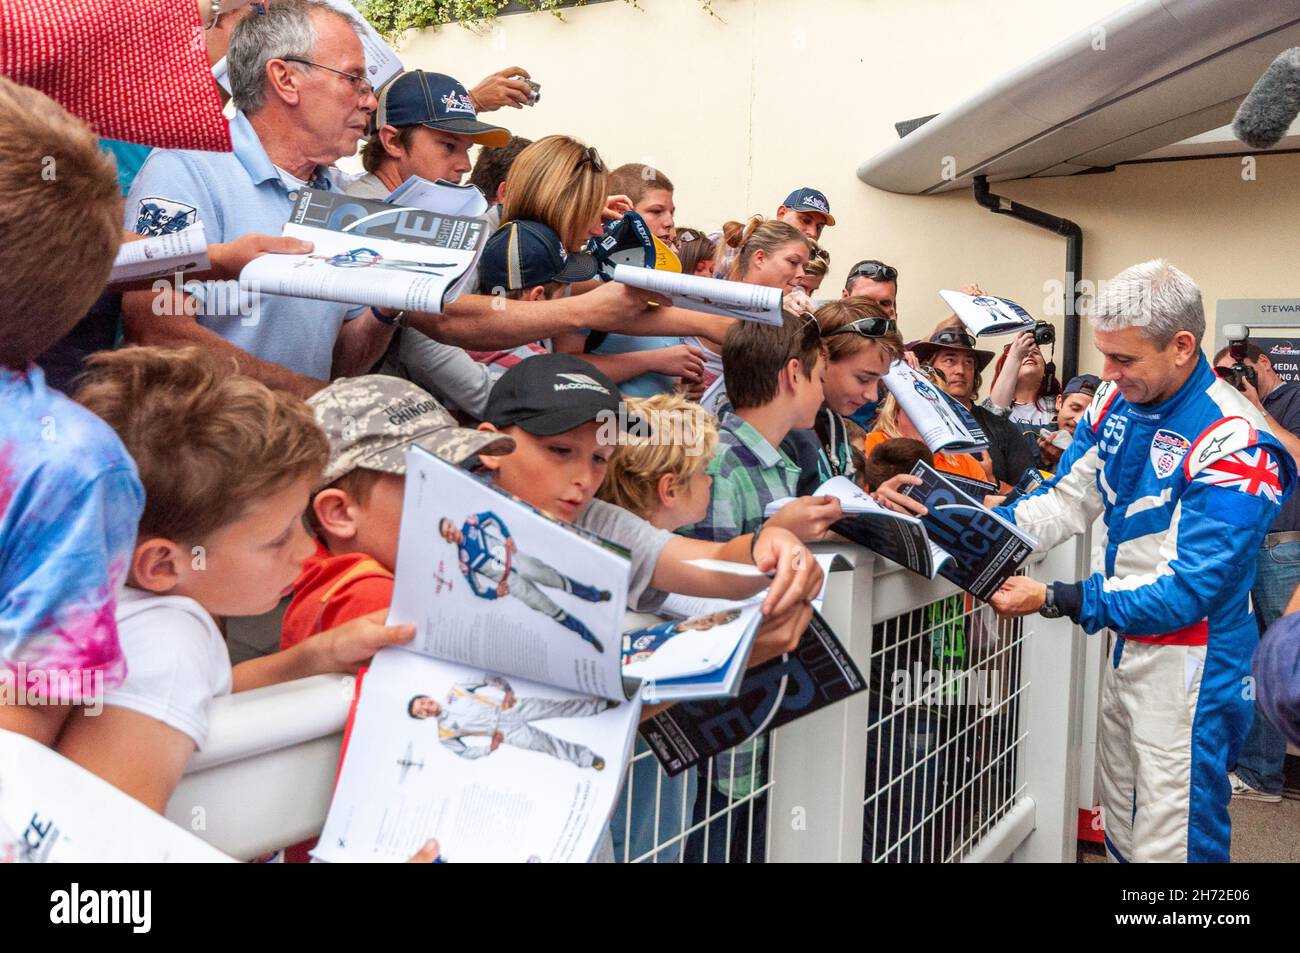 Winner Paul Bonhomme signing autographs after the Red Bull Air Race at Royal Ascot 2015. Autograph hunters. Autographing event programmes. Young fans Stock Photo